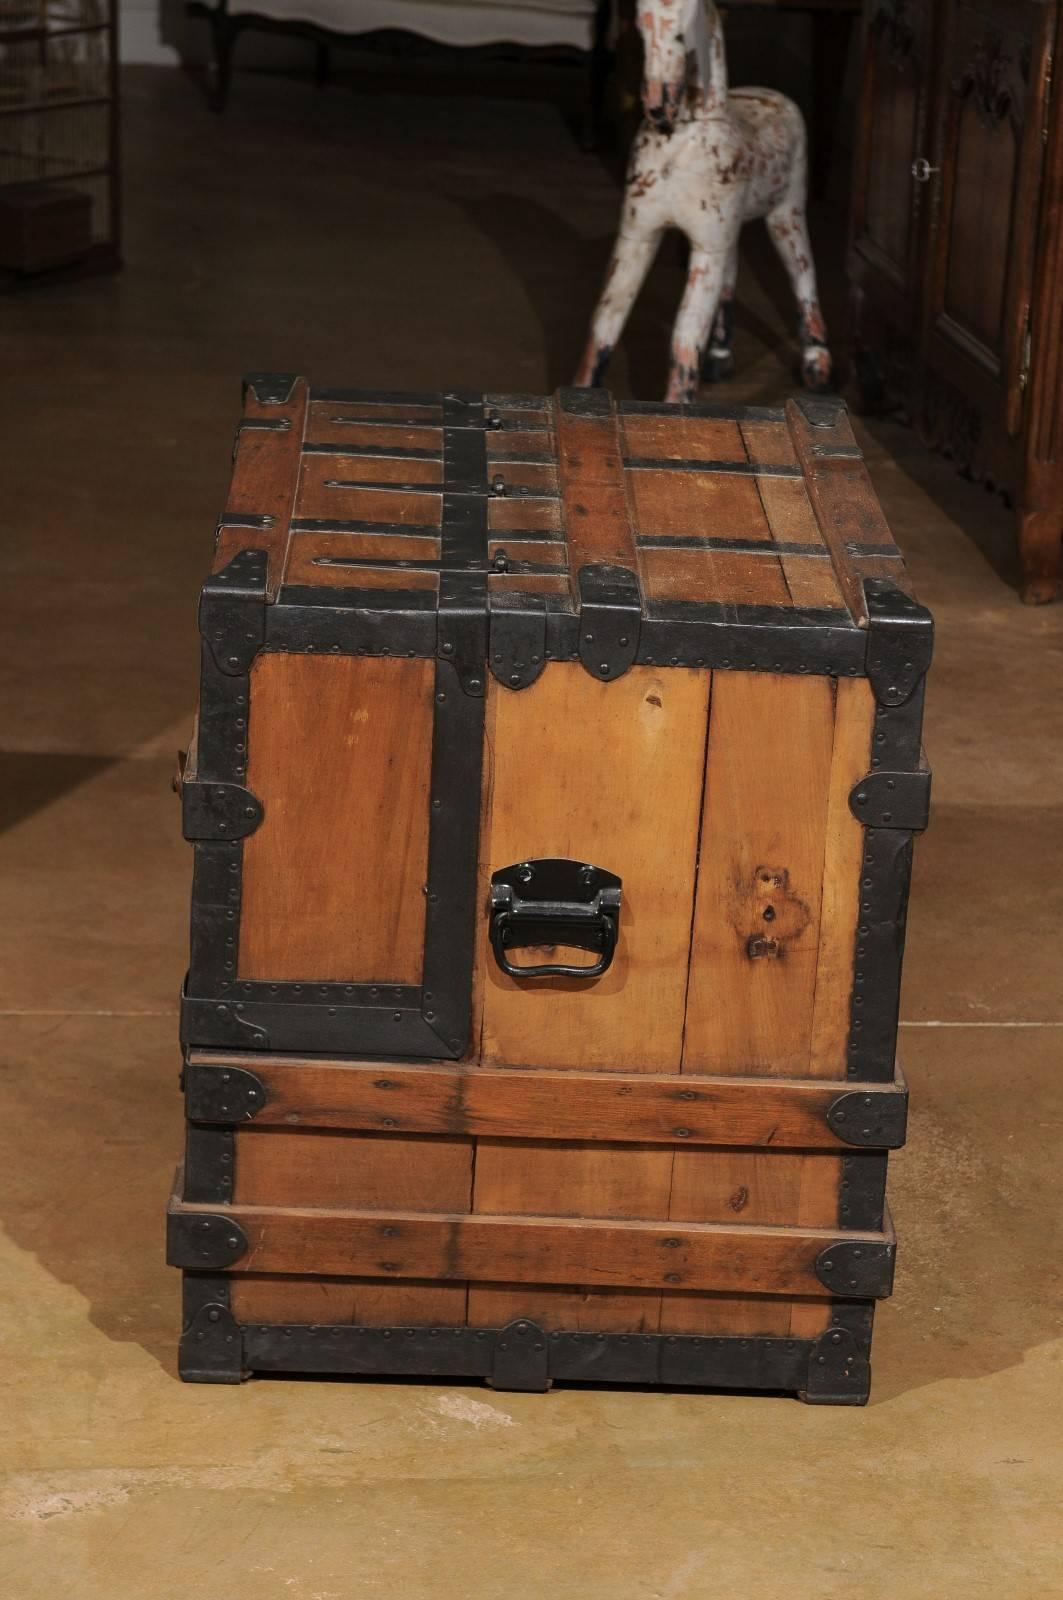 20th Century English Wooden Steamer Trunk with Iron Banding and Multiple Compartments